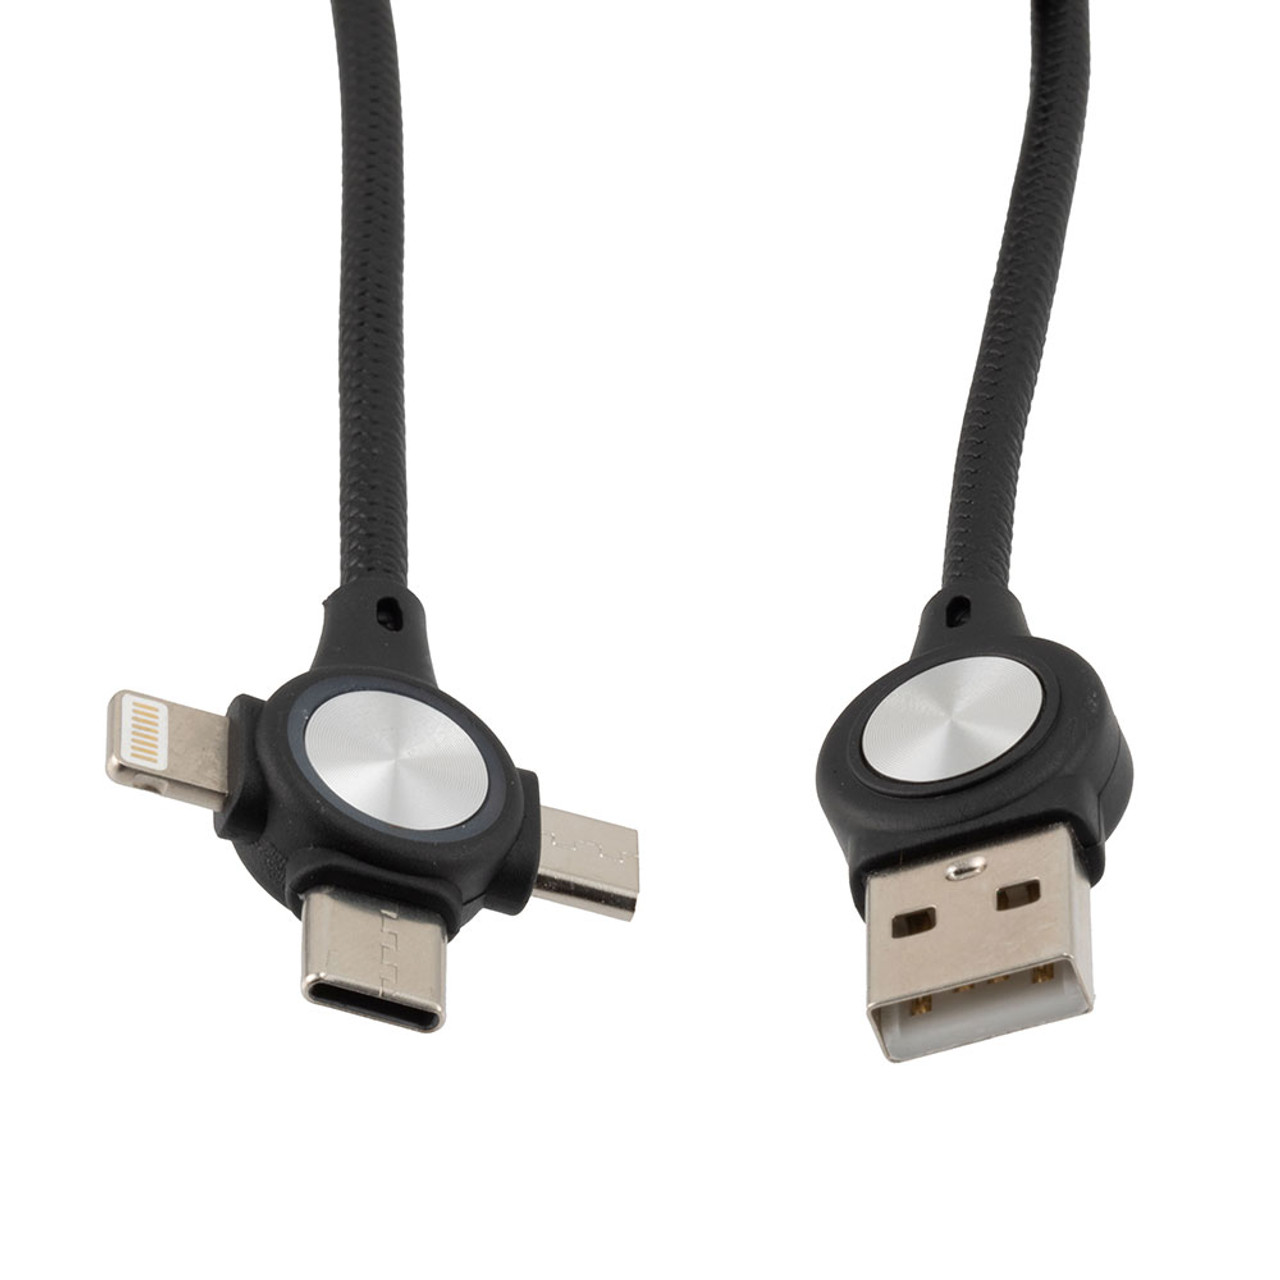 NavePoint USB 2.0 PVC Nylon Braided Cable, Black, USB A Male to Type C/Micro/Lightning Compatible, 1 Foot Coil